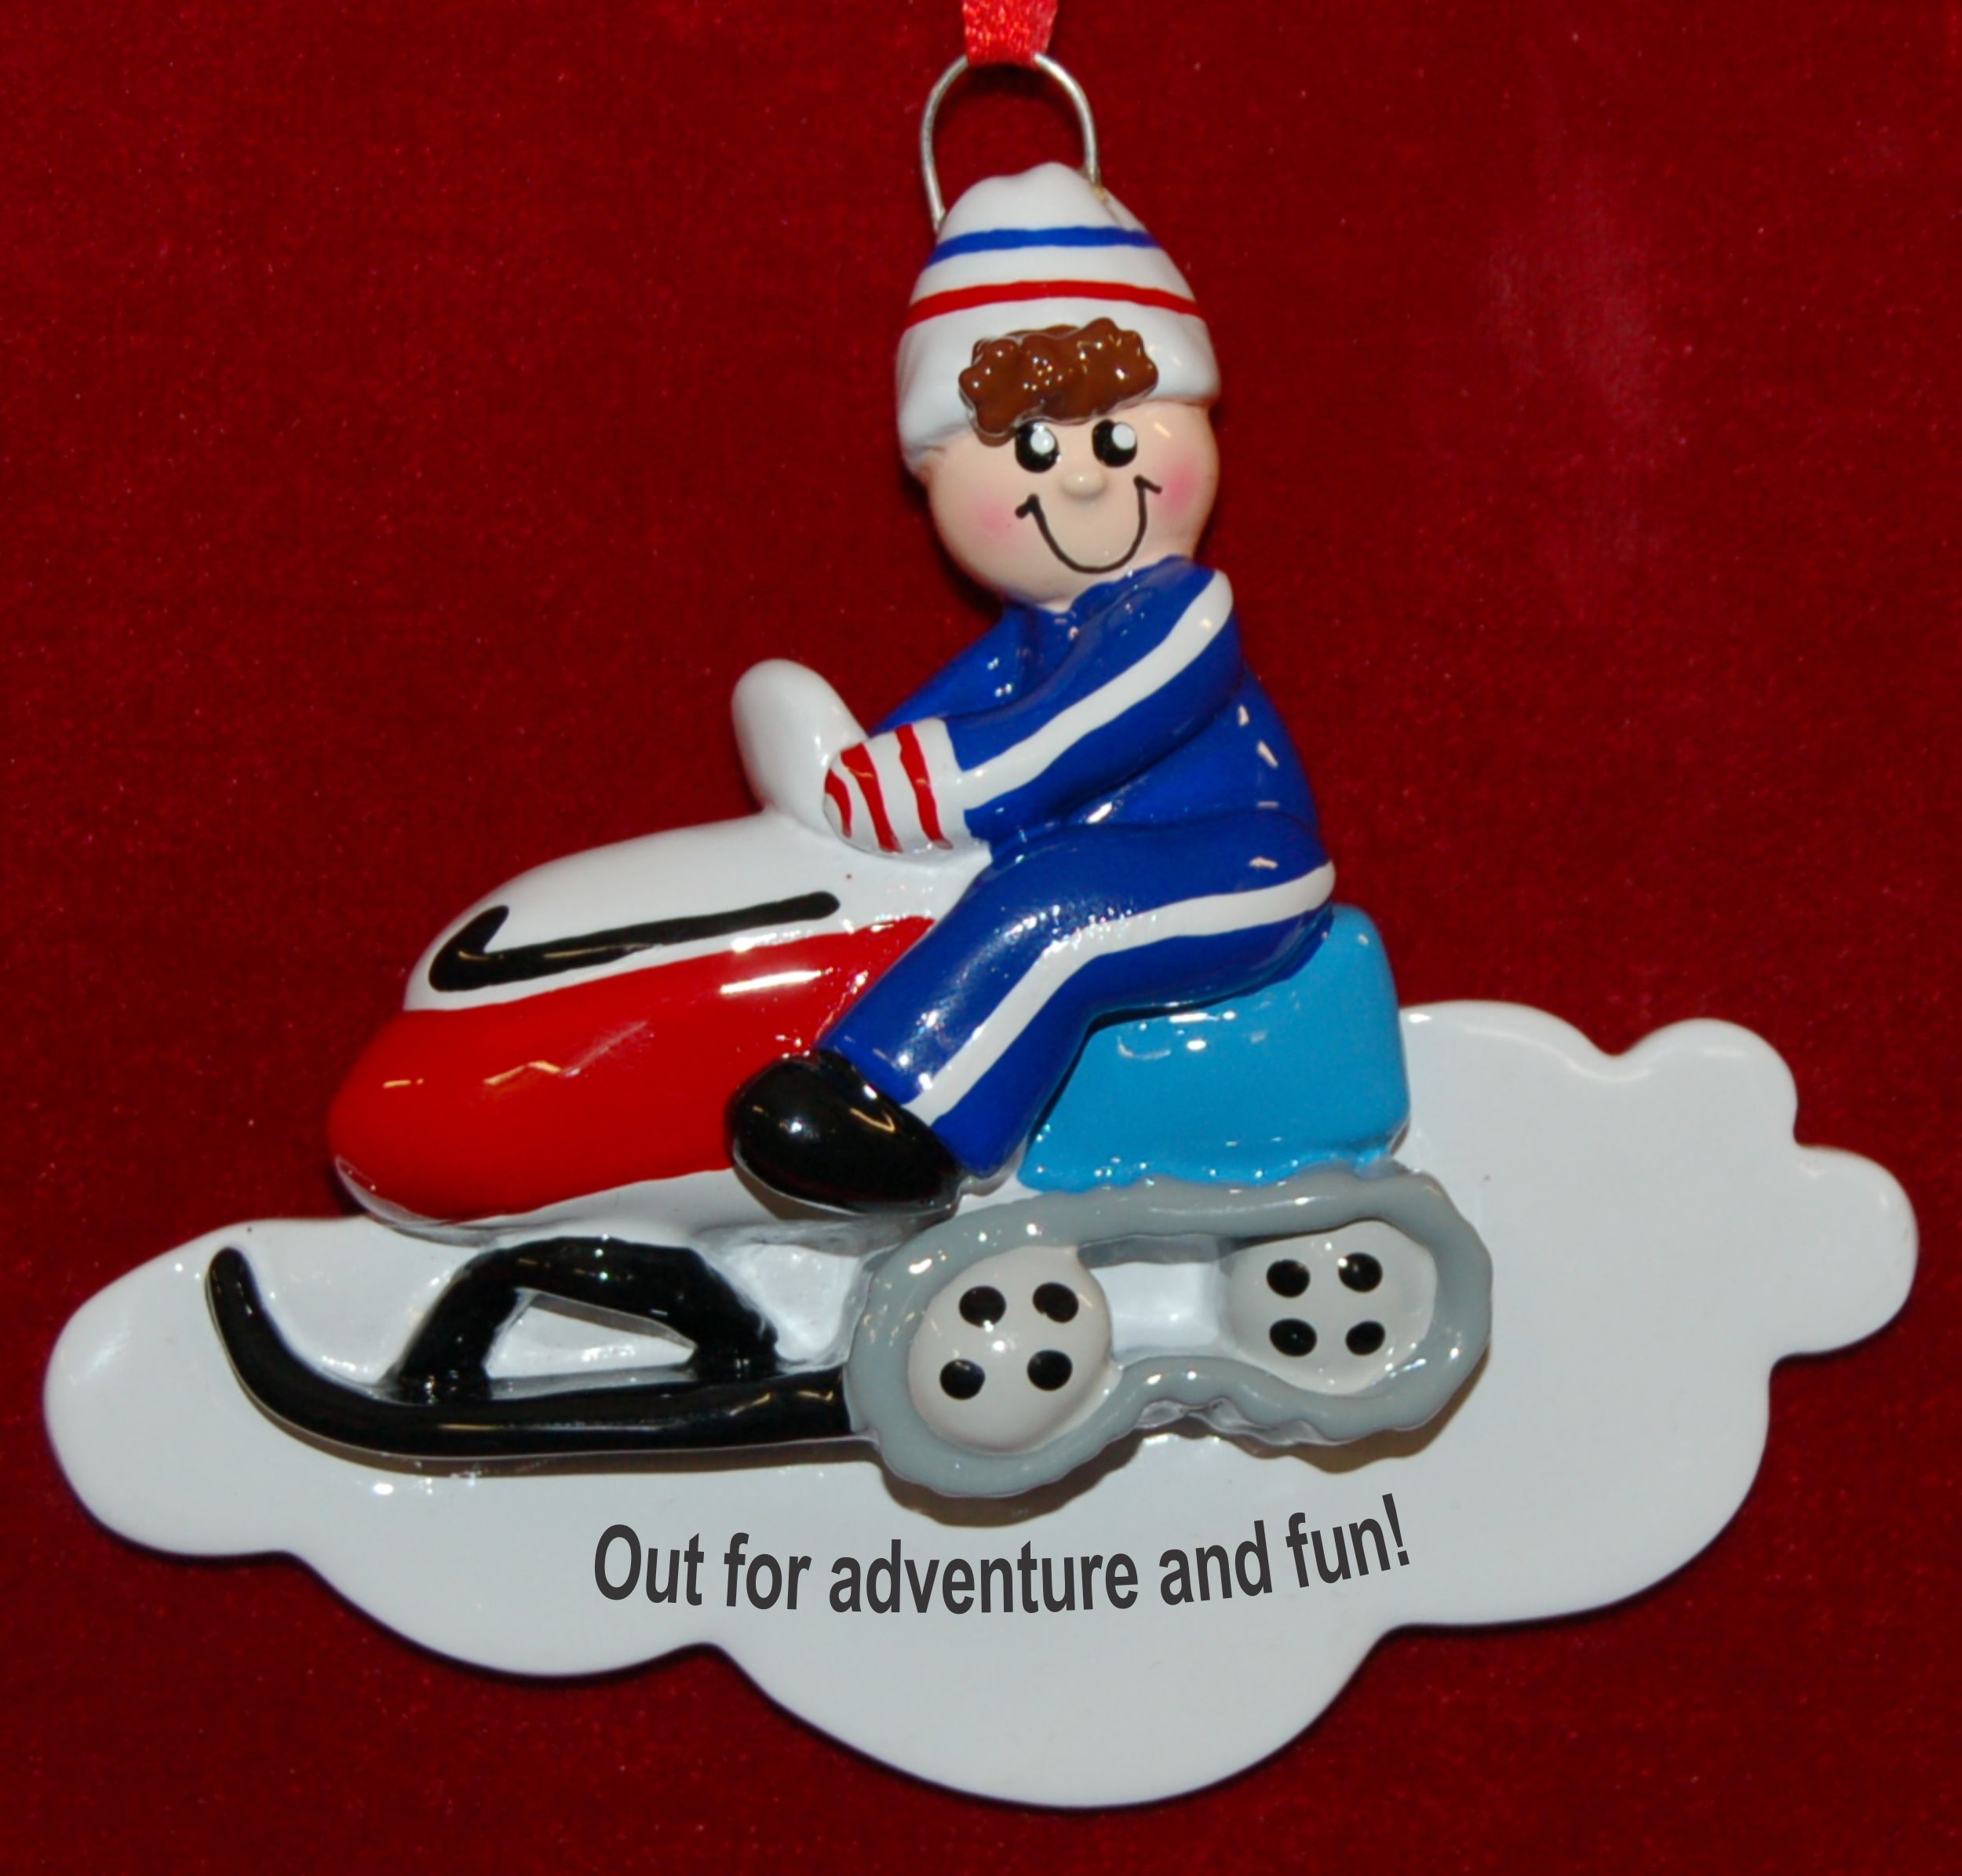 Snowmobile Christmas Ornament for Boy Personalized by RussellRhodes.com